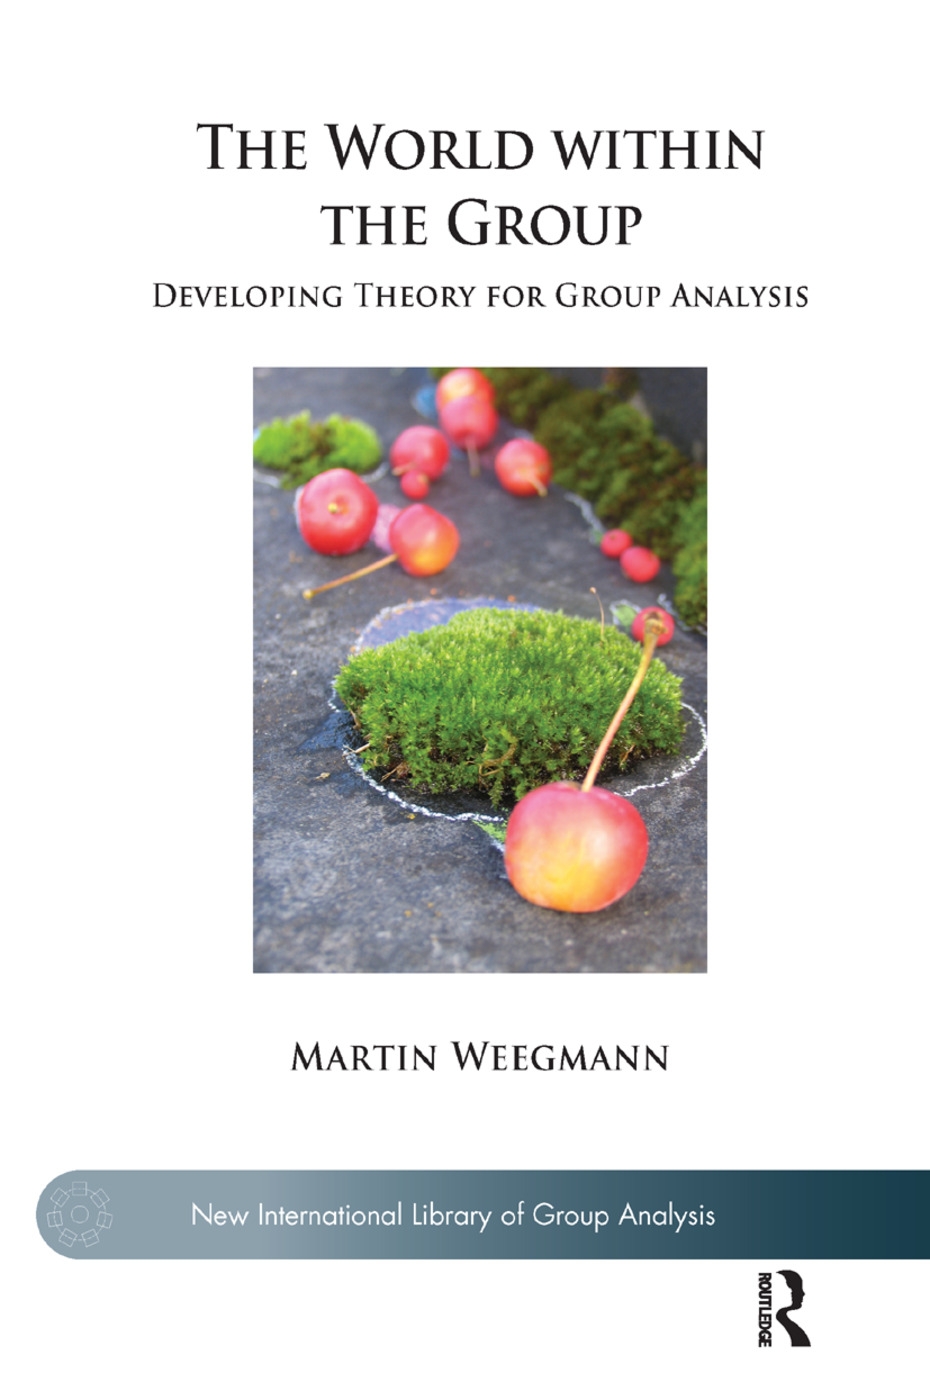 The World Within the Group: Developing Theory for Group Analysis